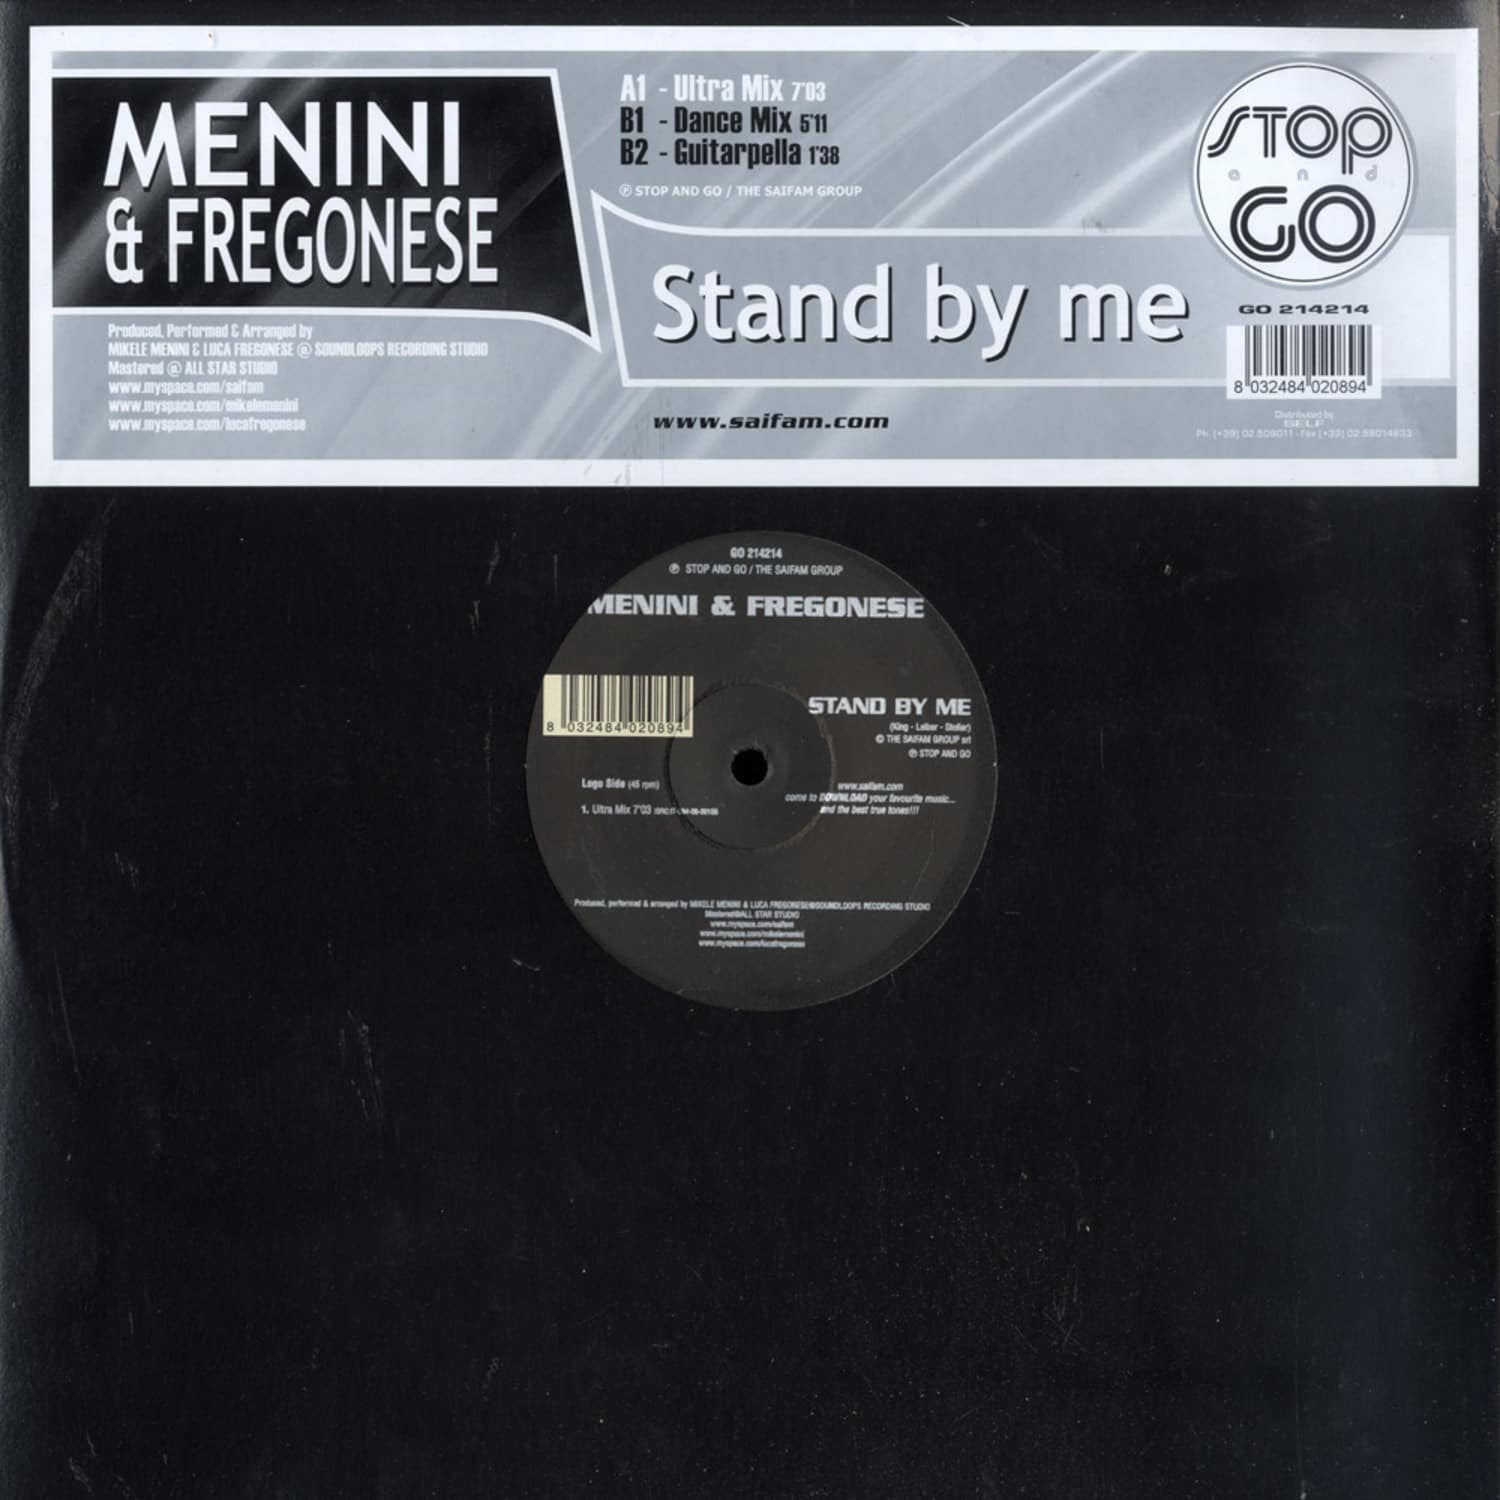 Menini & Fregonese - STAND BY ME